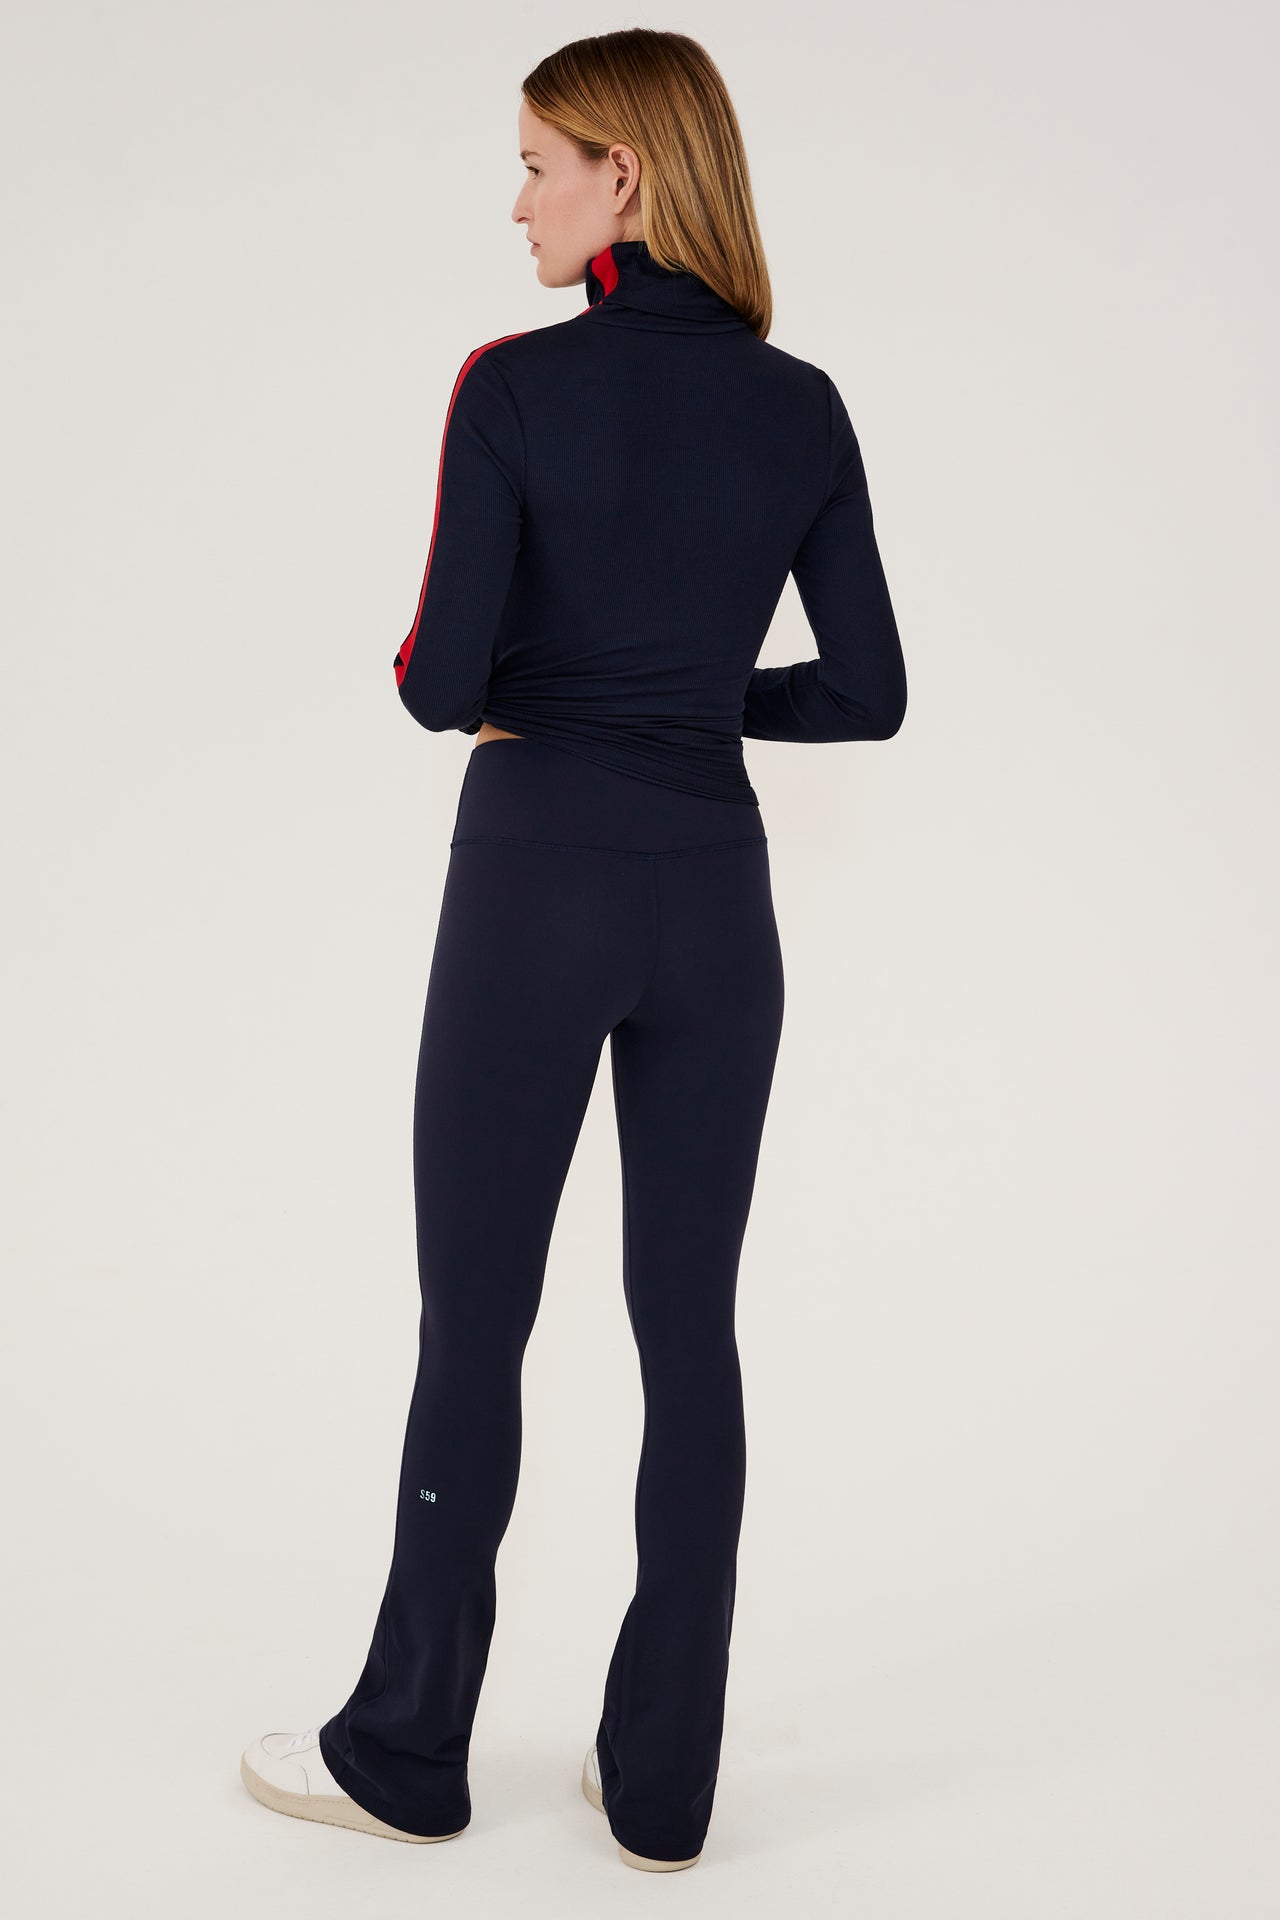 The back view of a woman wearing a SPLITS59 Jackson Rib Full Length Turtleneck in Indigo/Pirate Red tracksuit.